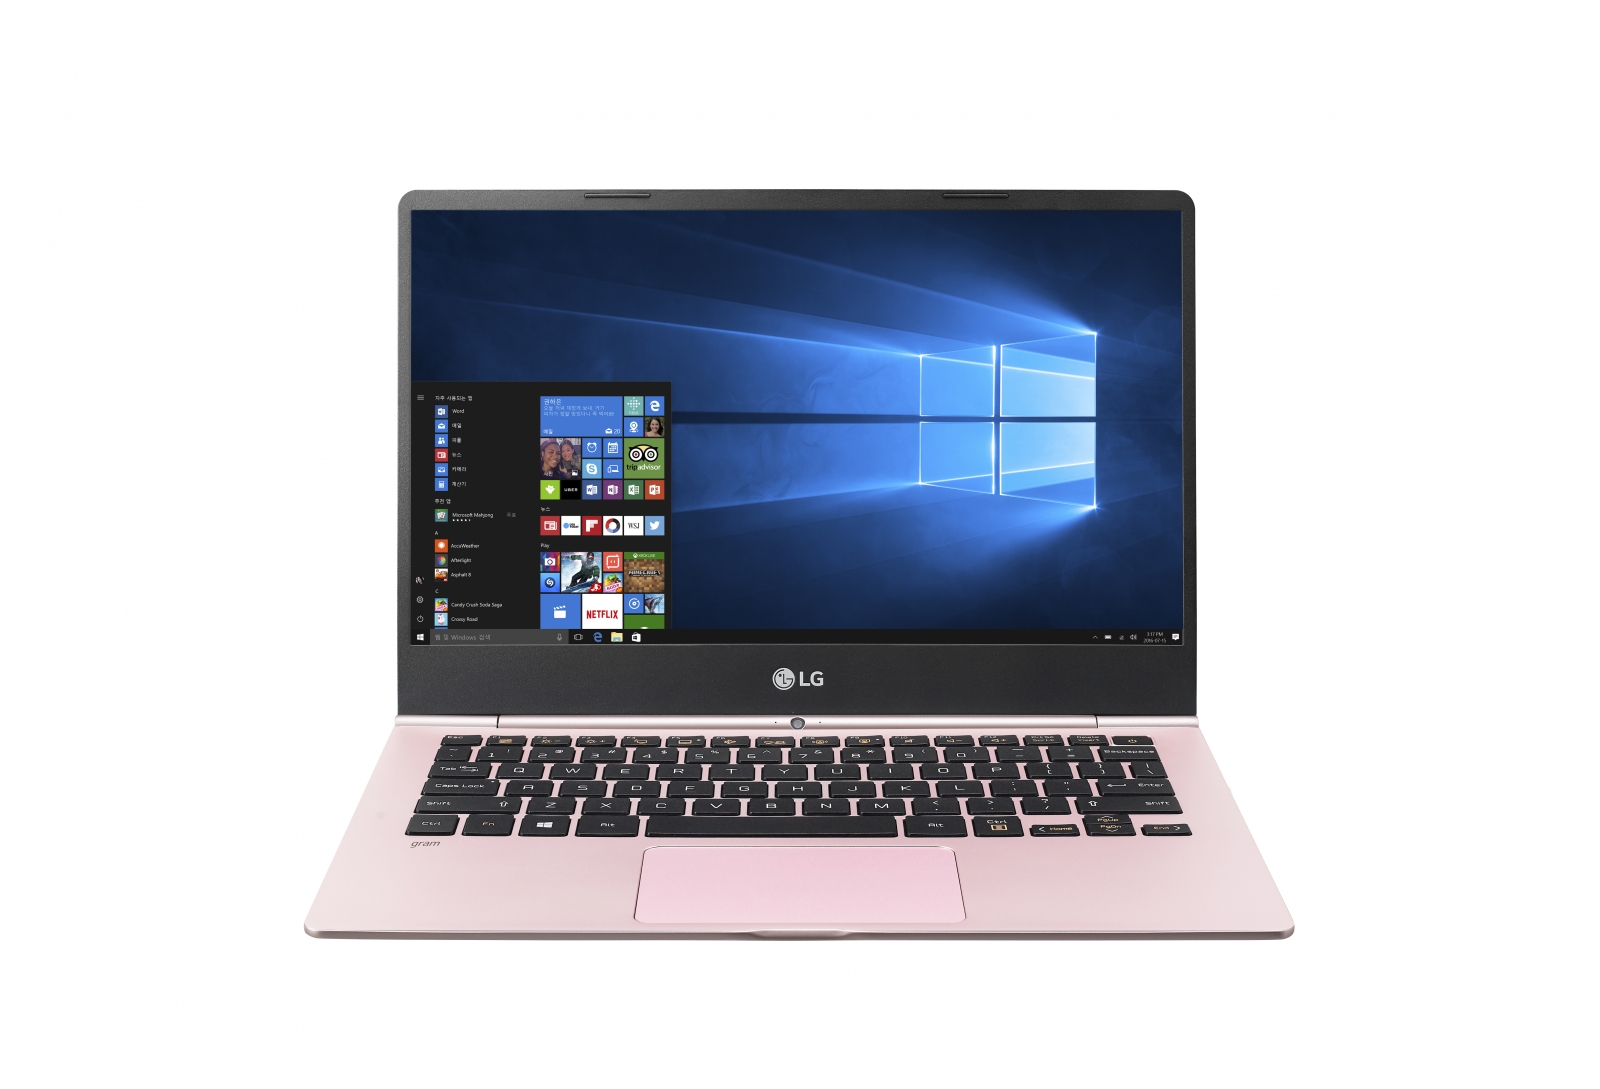 LG Gram laptops powered by Windows 10 debut at CES 2017